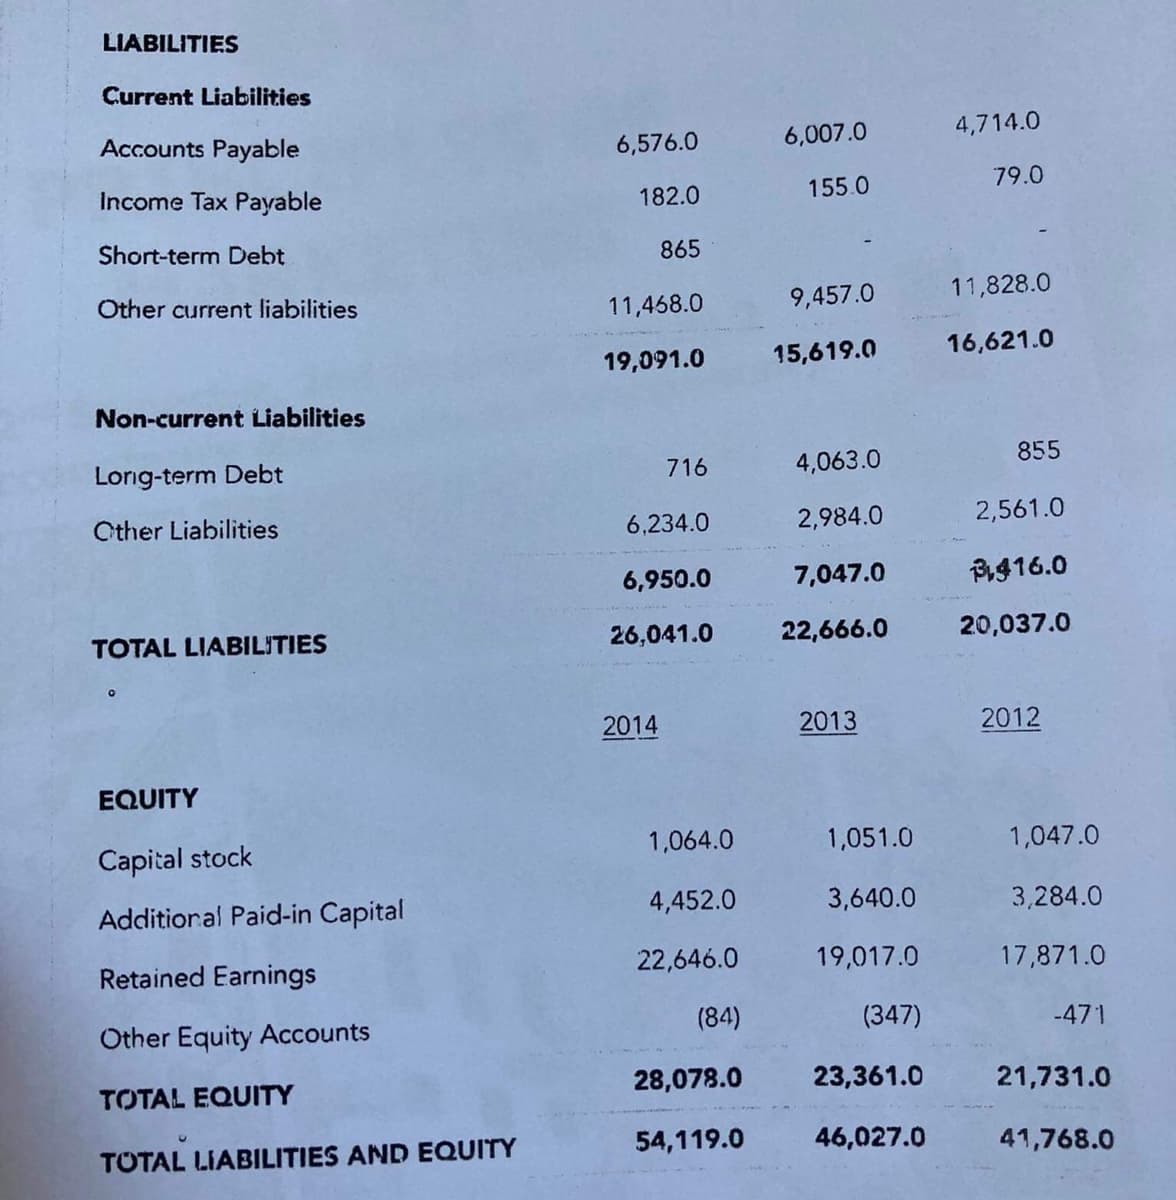 LIABILITIES
Current Liabilities
Accounts Payable
6,576.0
6,007.0
4,714.0
Income Tax Payable
182.0
155.0
79.0
Short-term Debt
865
Other current liabilities
11,468.0
9,457.0
11,828.0
19,091.0
15,619.0
16,621.0
Non-current Liabilities
Lorig-term Debt
716
4,063.0
855
Cther Liabilities
6,234.0
2,984.0
2,561.0
6,950.0
7,047.0
B916.0
TOTAL LIABILITIES
26,041.0
22,666.0
20,037.0
2014
2013
2012
EQUITY
Capital stock
1,064.0
1,051.0
1,047.0
Additioral Paid-in Capital
4,452.0
3,640.0
3,284.0
Retained Earnings
22,646.0
19,017.0
17,871.0
Other Equity Accounts
(84)
(347)
-471
TOTAL EQUITY
28,078.0
23,361.0
21,731.0
TOTAL LIABILITIES AND EQUITY
54,119.0
46,027.0
41,768.0
